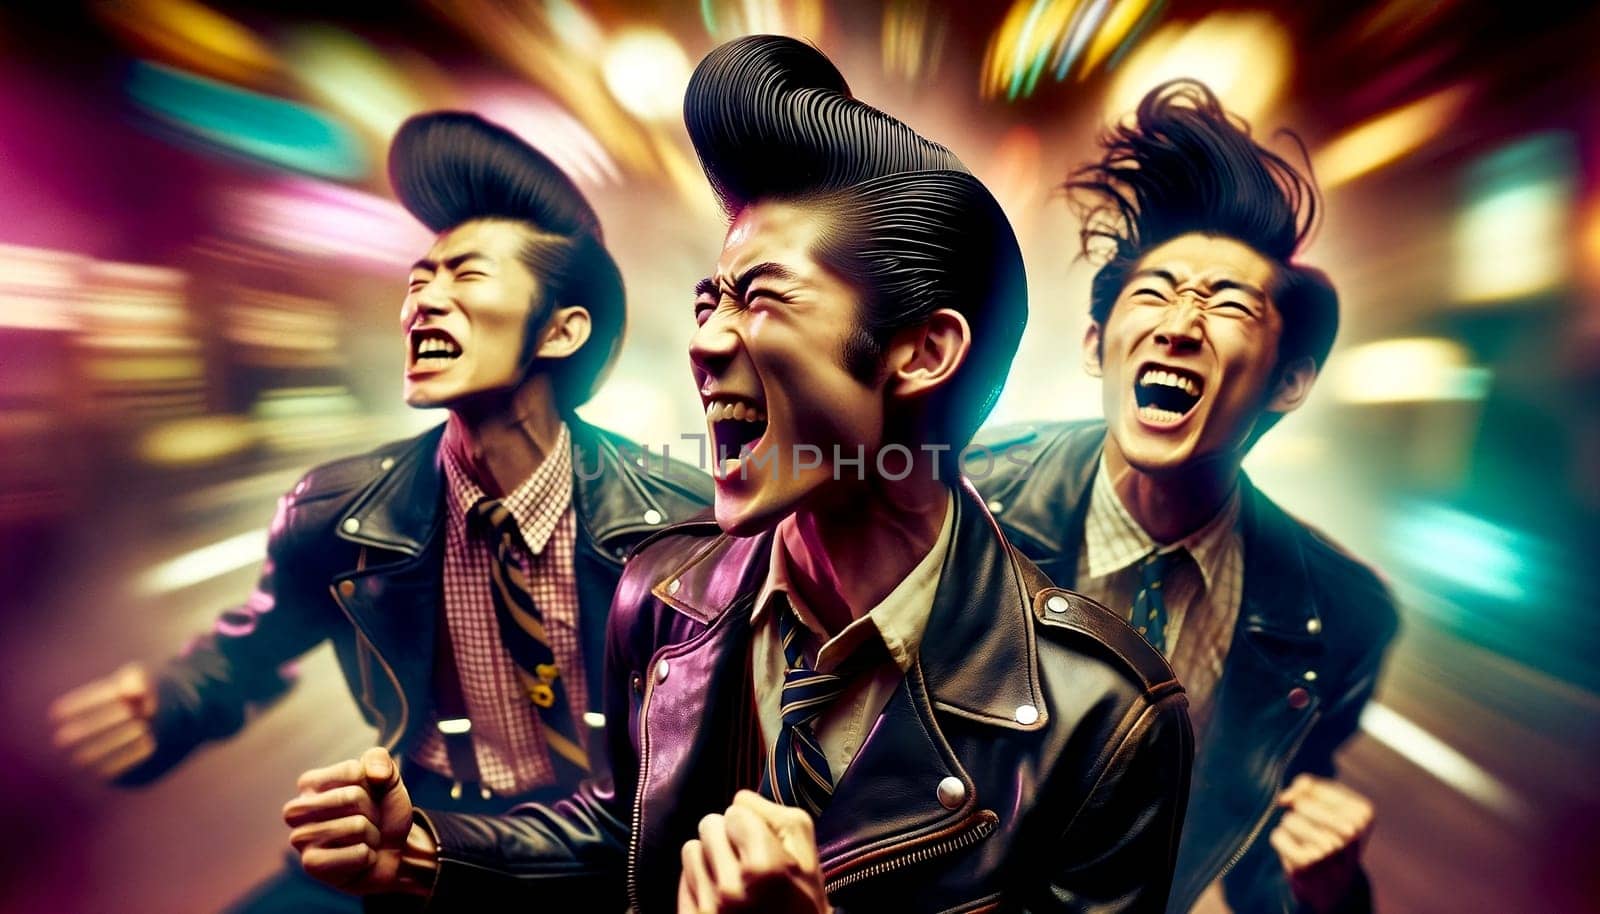 Portrait of Japanese Rockabilly Enthusiasts with Iconic Hairstyles, Close Up. High quality photo